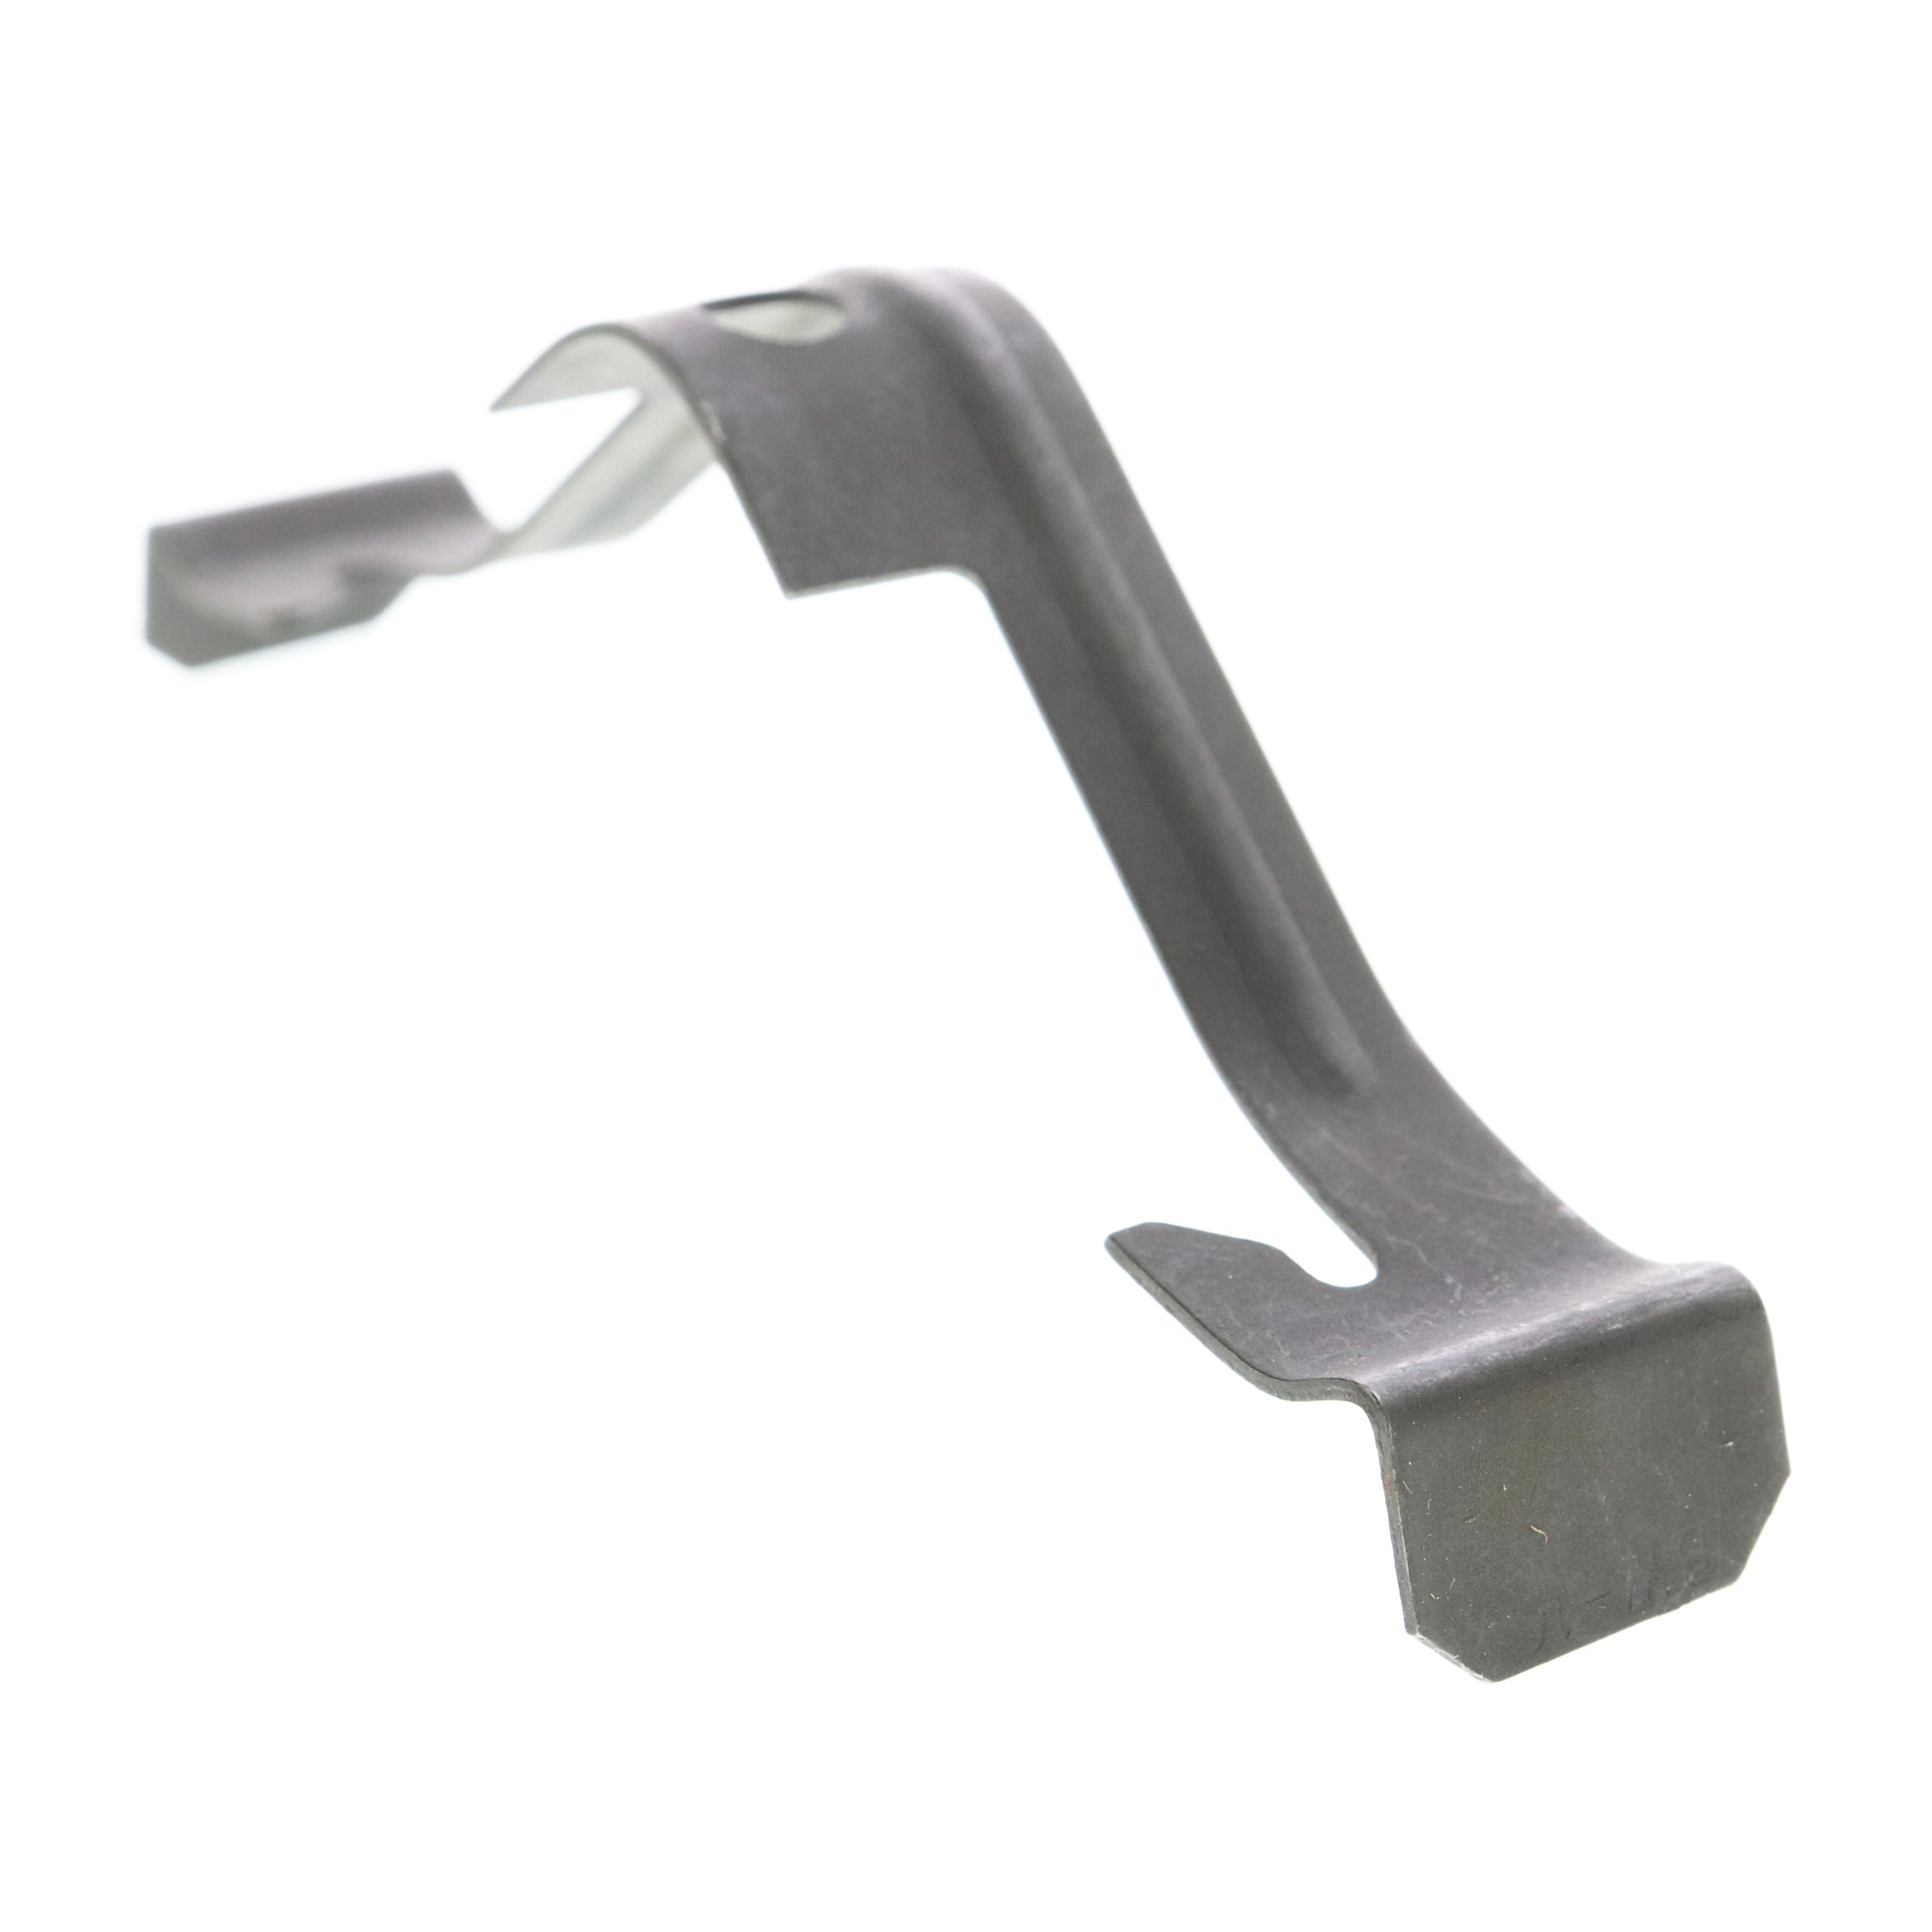 B-Line Systems, COOPER B-LINE BW-16 WING CLIP ROD OR WIRE FASTENER, 3/4" - 1", (100-PACK)